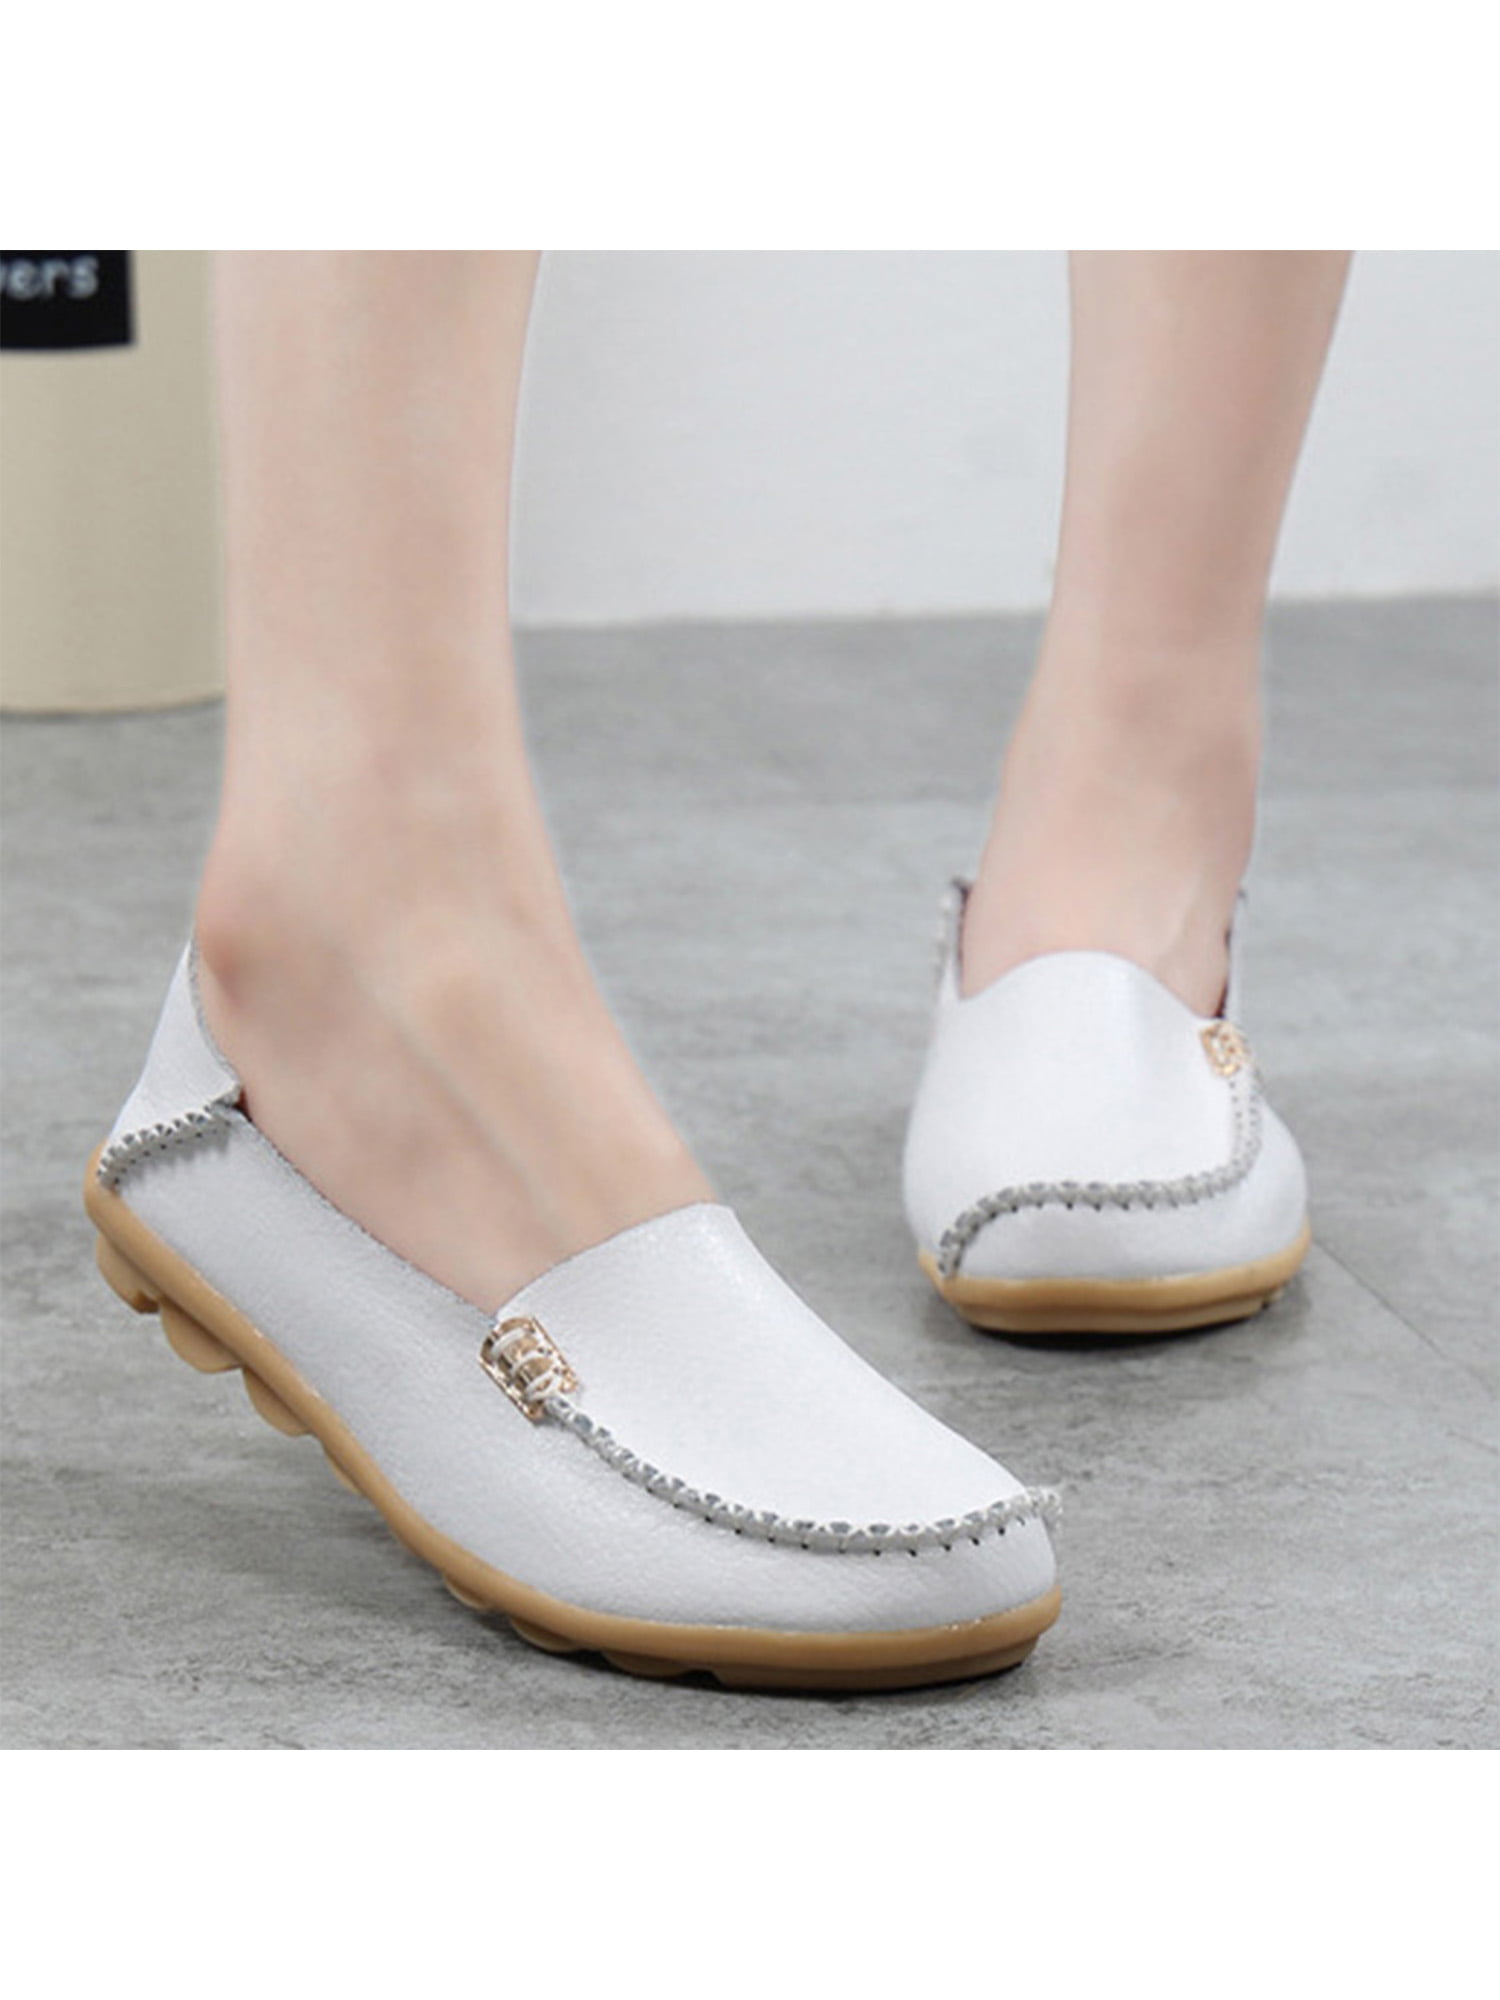 womens leather shoes Ballet shoes womens ballet shoes Shoes Womens Shoes Slip Ons Moccasins petrol shoes soft insole shoes, blue leather flat shoes for women leather pumps 